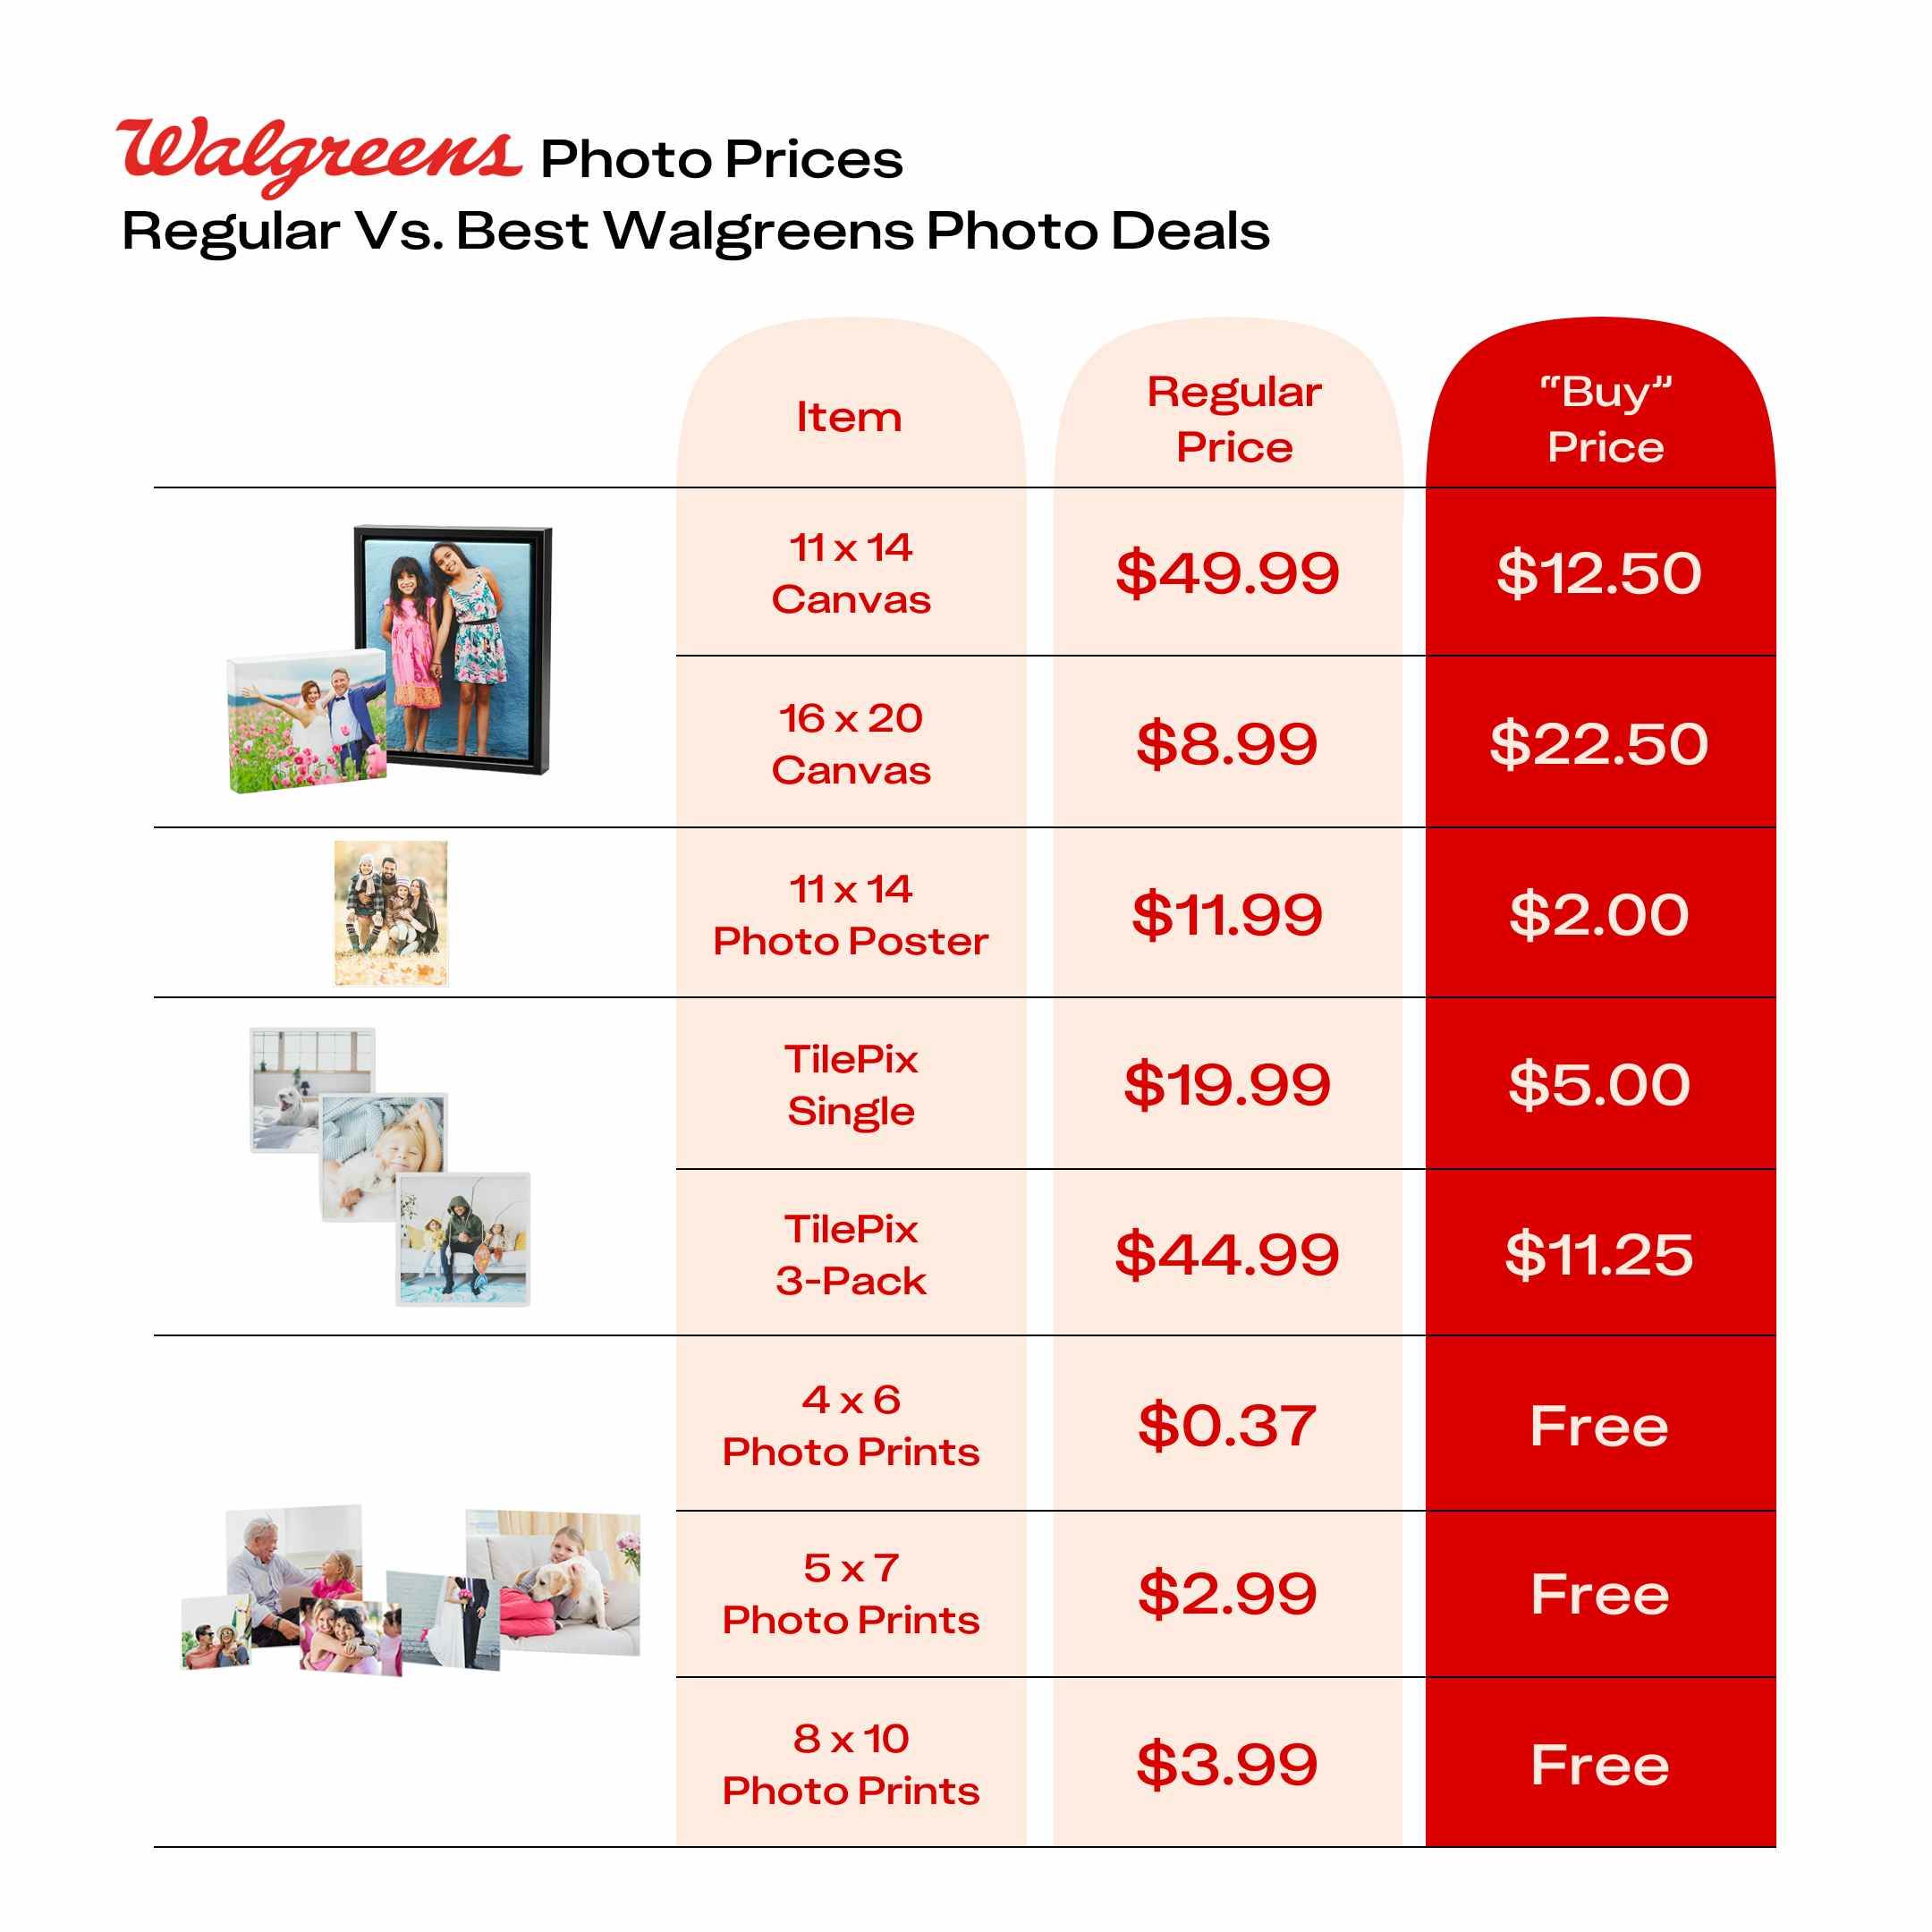 a table showing Walgreens photo deal prices compared to their regular prices